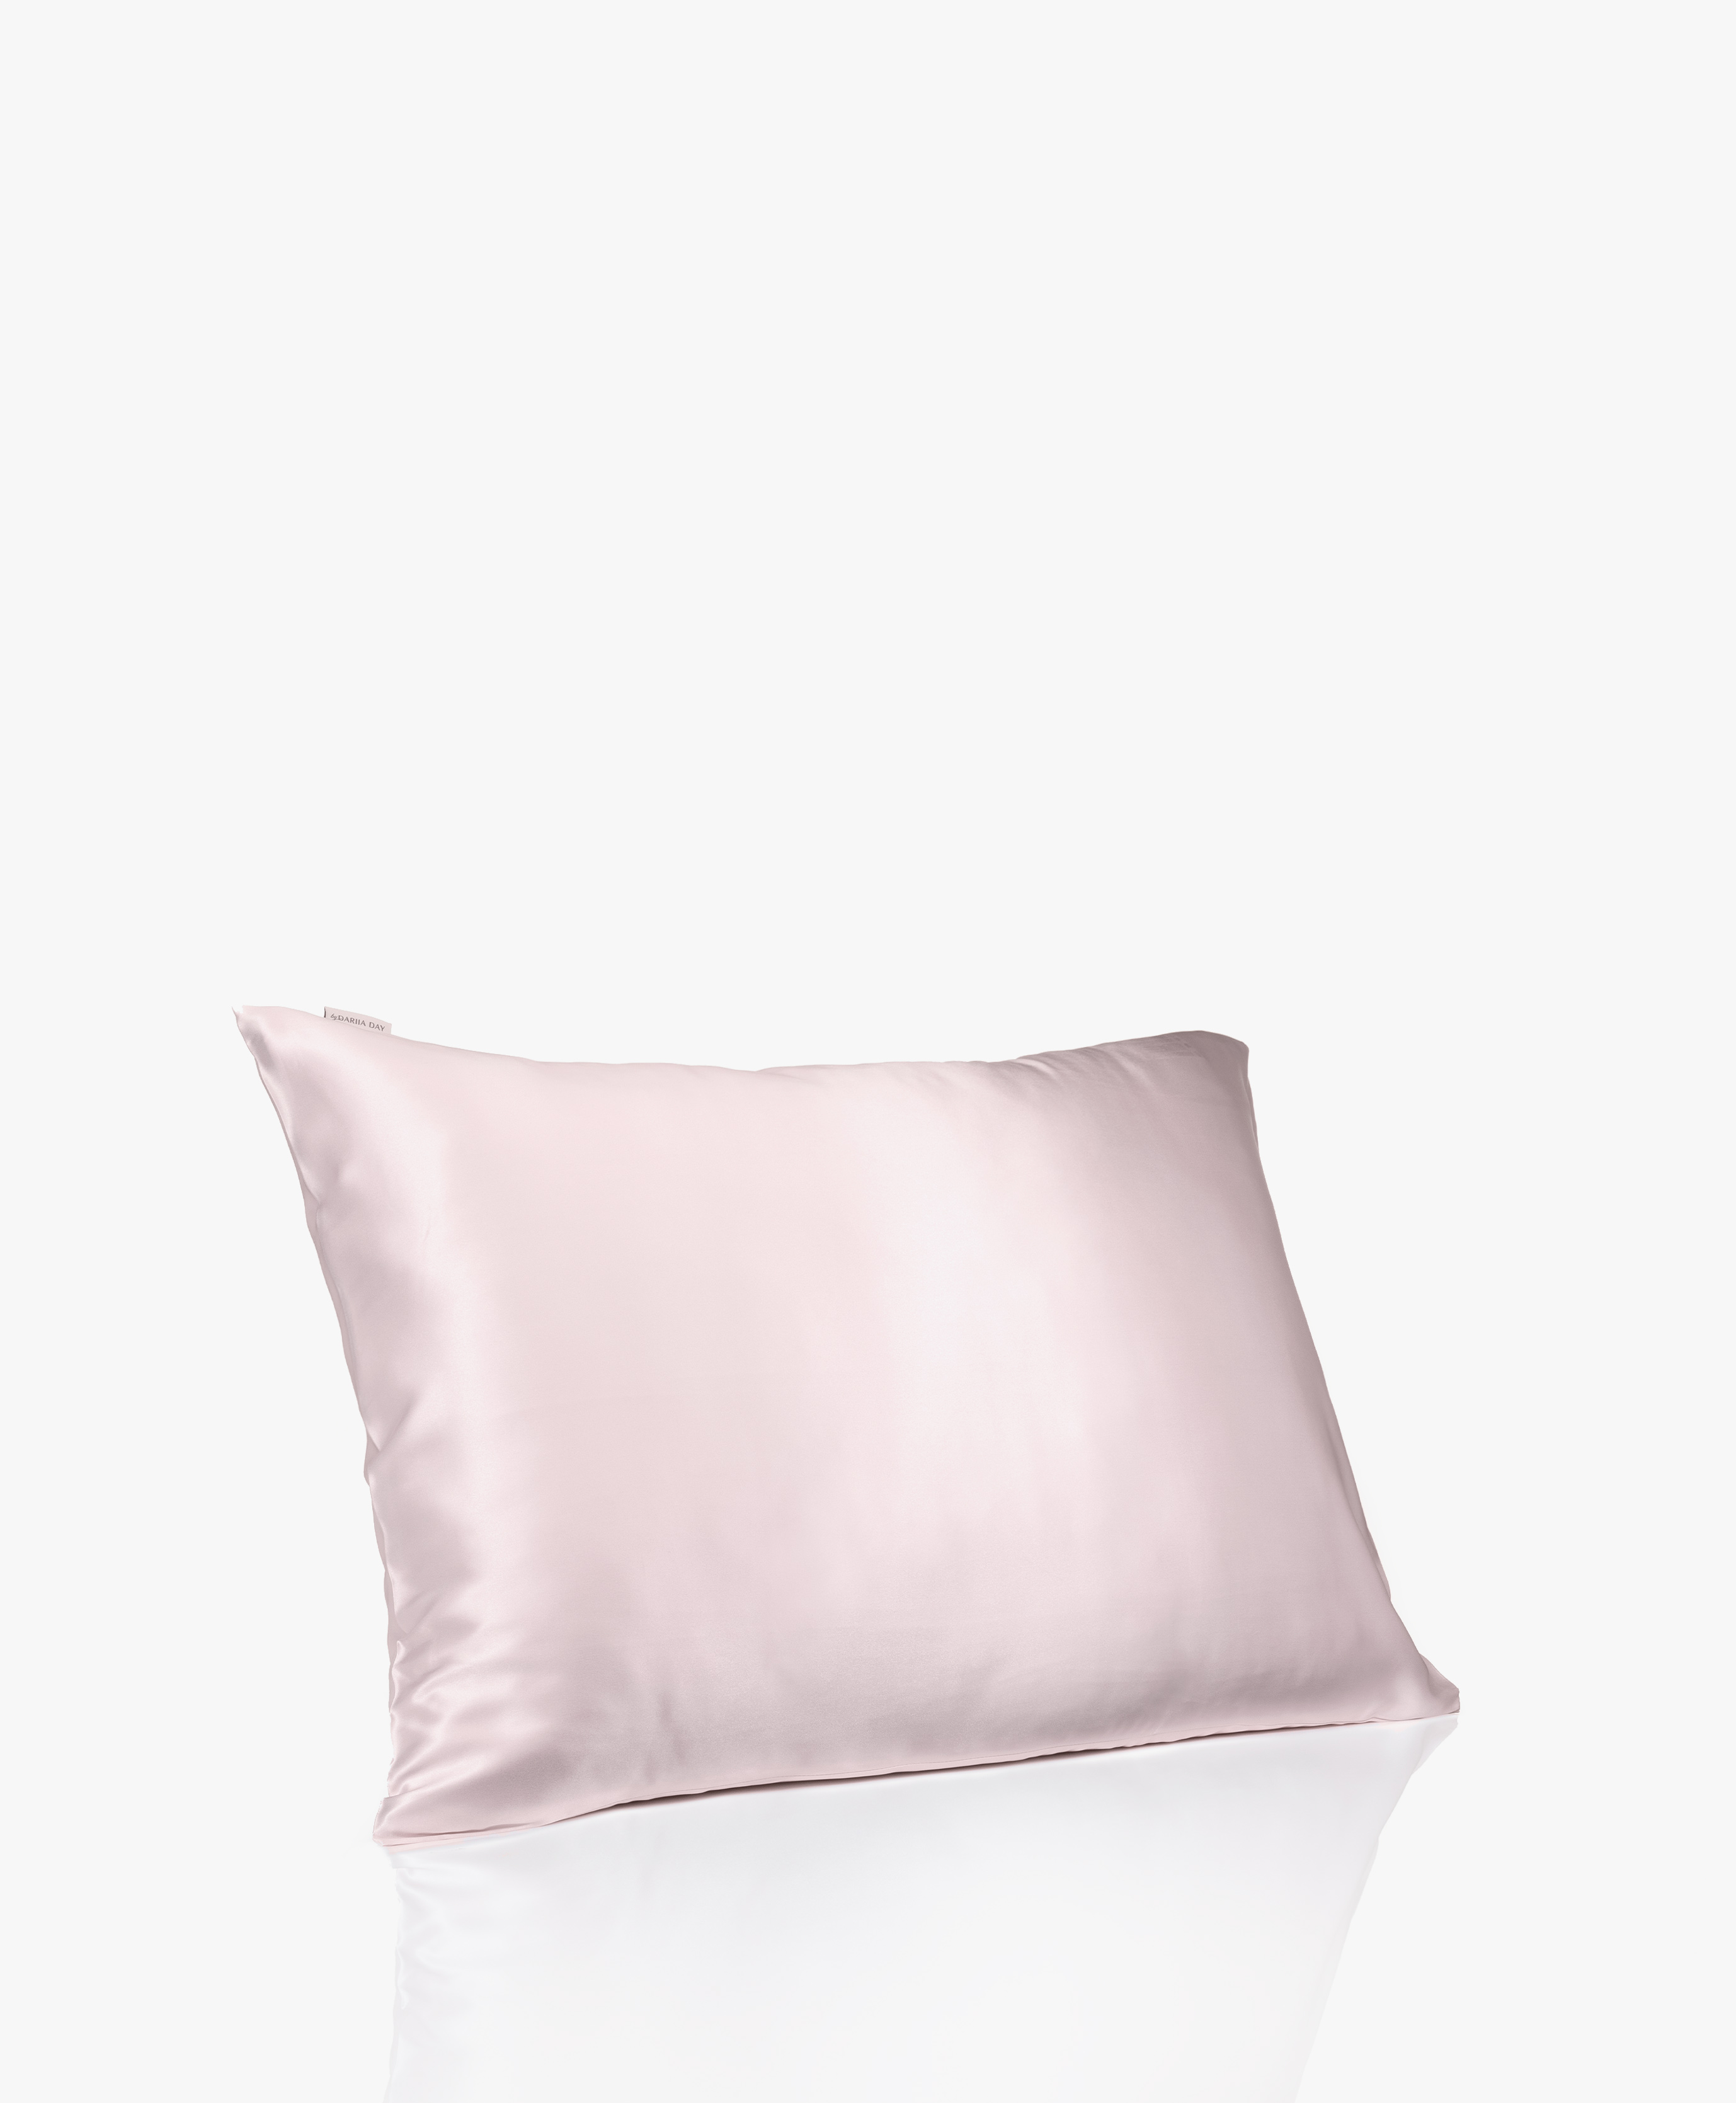 By Dariia Day Mulberry Silk Pillow Case, Light Pink Pillow Cases